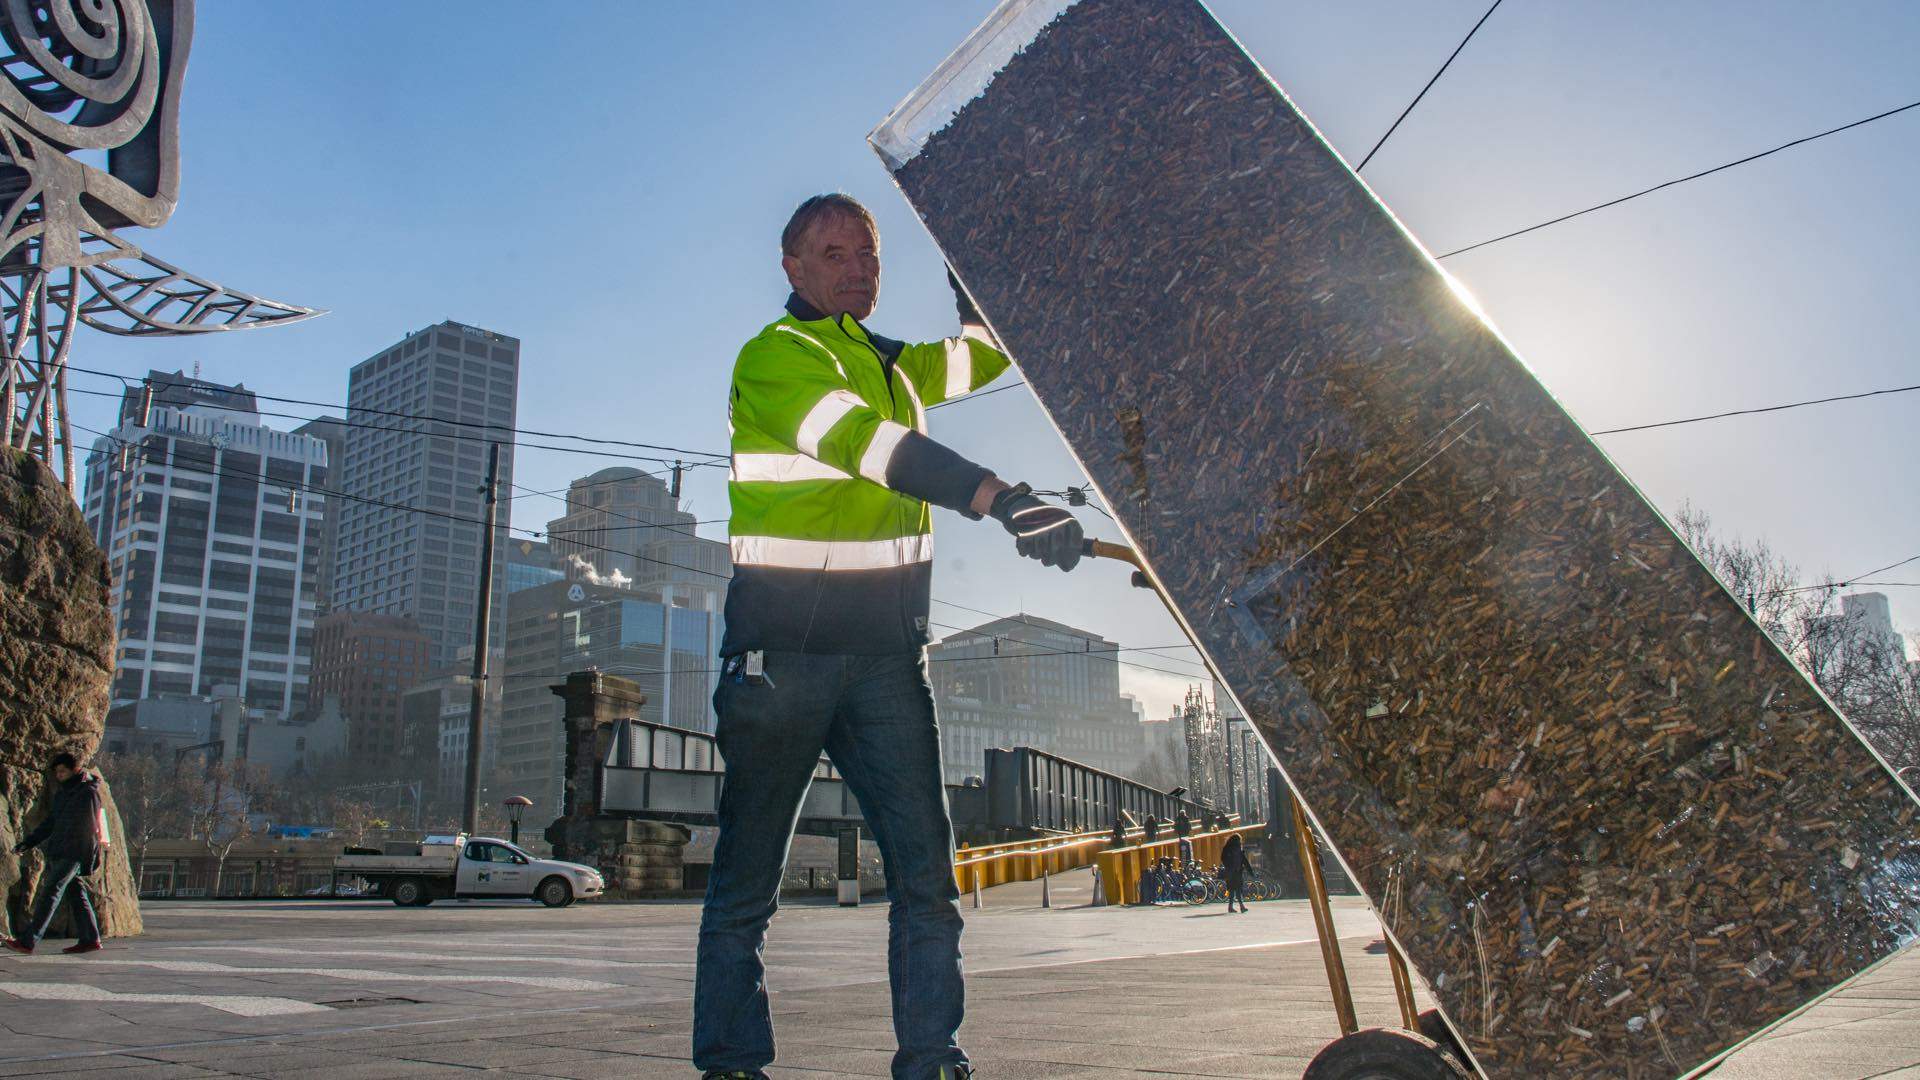 The City of Melbourne Is Upcycling Cigarette Butts Into Plastic Products